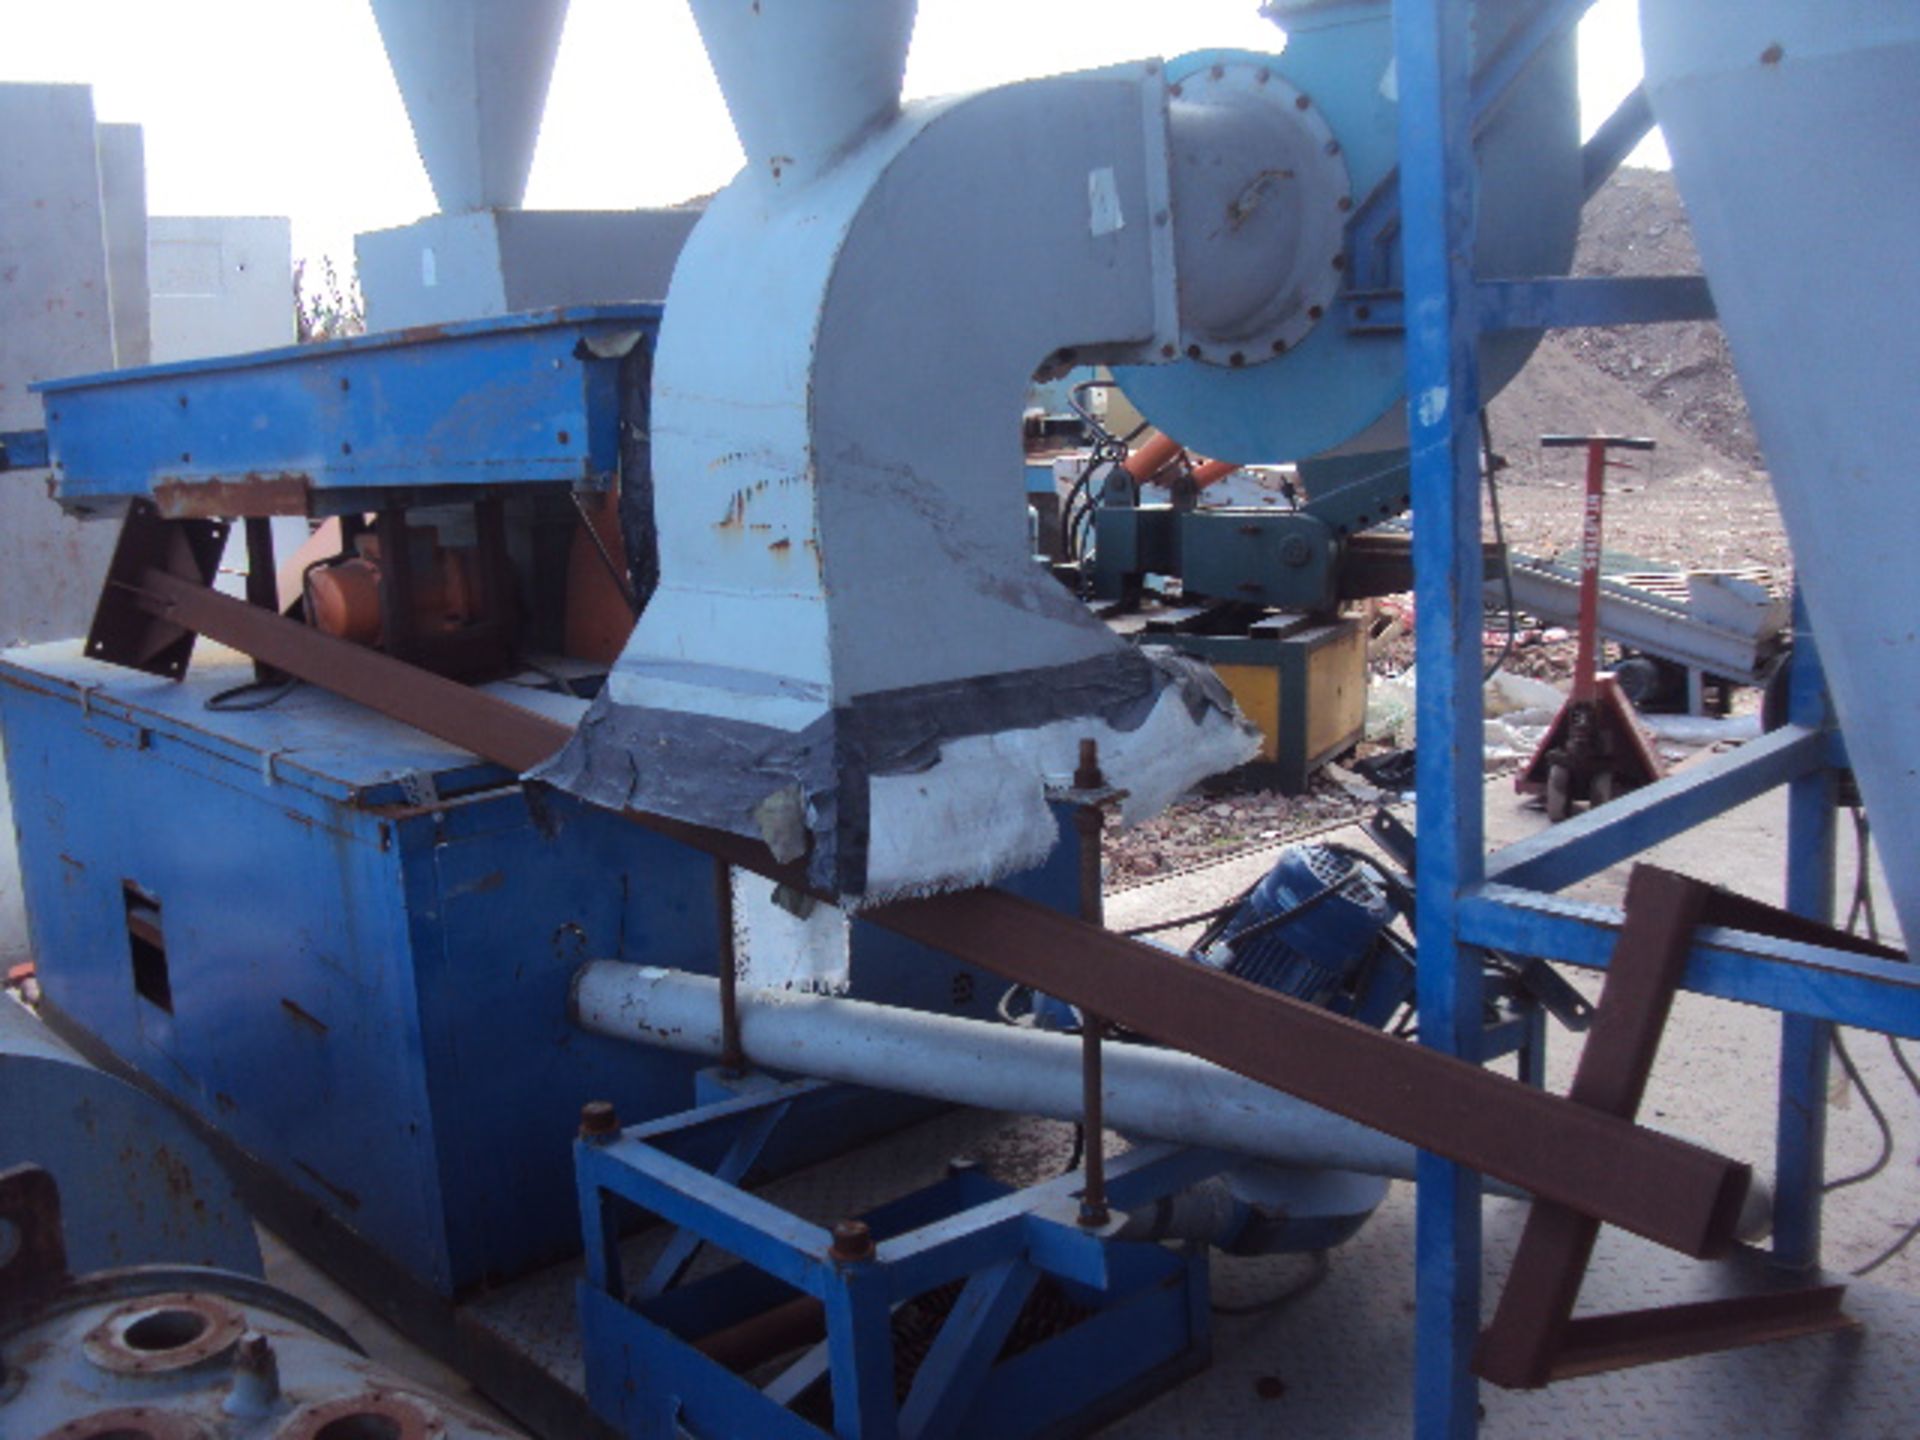 2011 SDR DY60 3-phase copper wire granulator/separator (size 420/520/260CM with twin feed & - Image 2 of 6